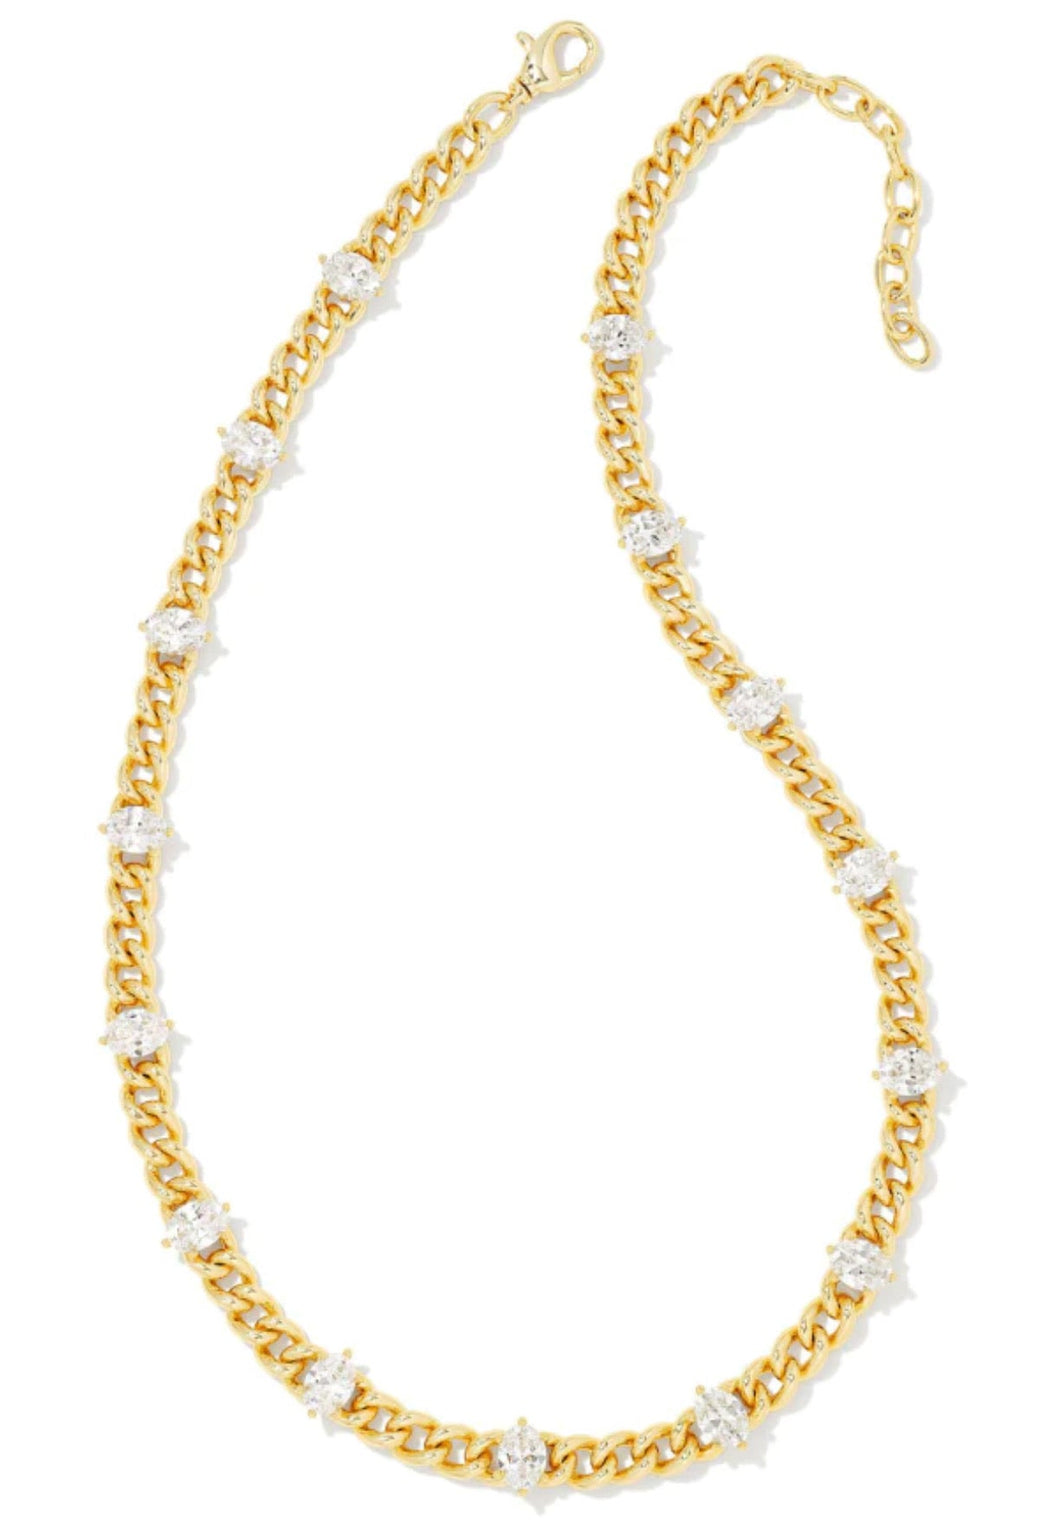 Kendra Scott-Cailin Crystal Chain Necklace - Gold Metal 9608803463